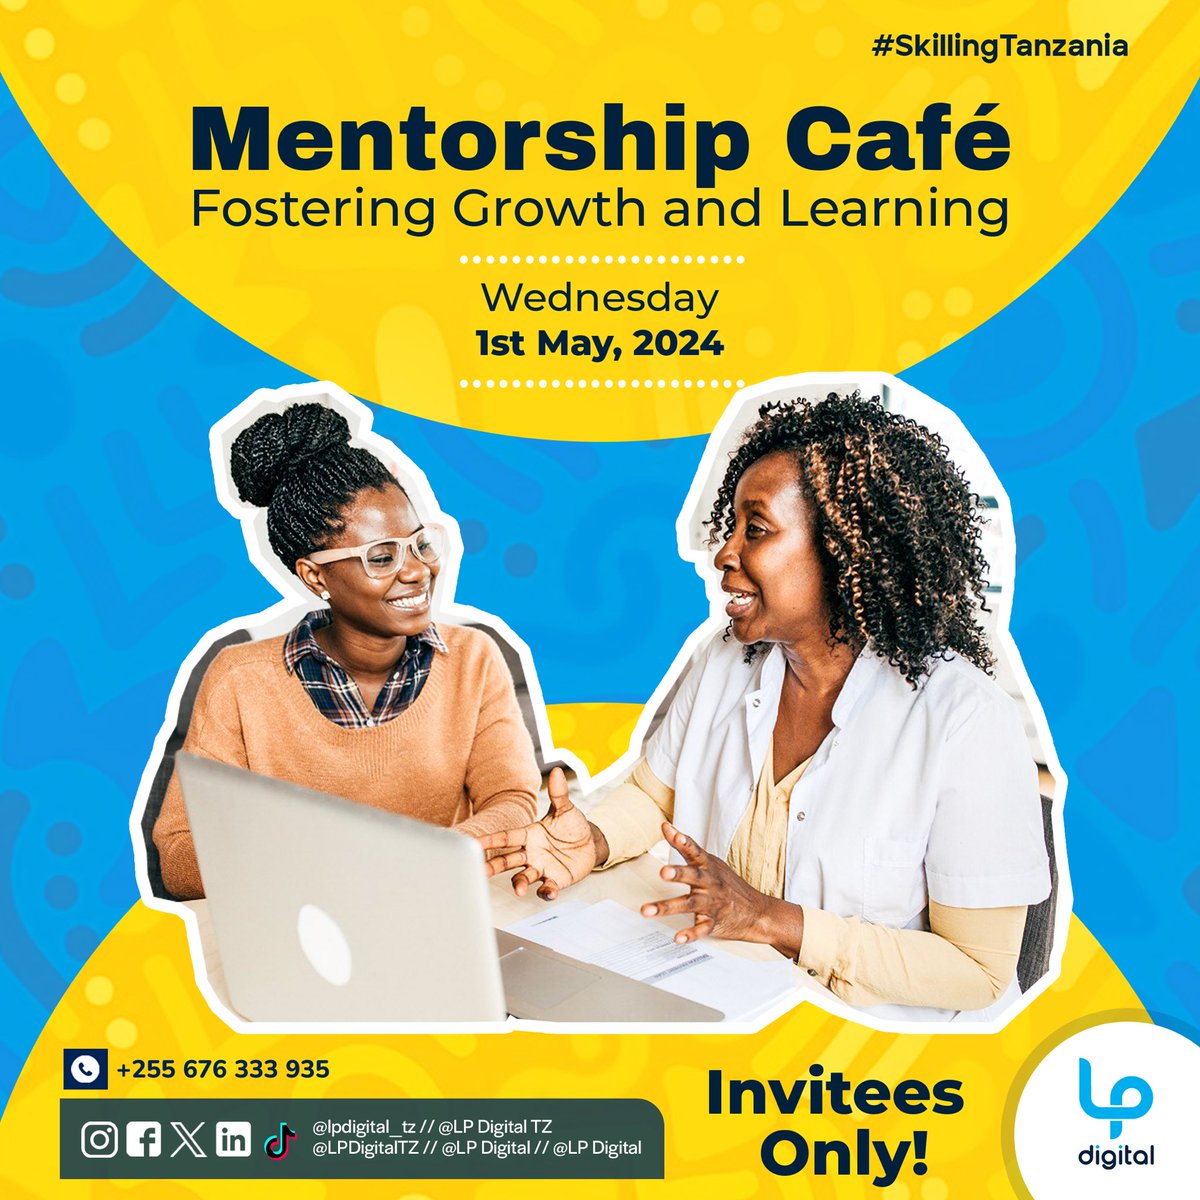 Mark your calendars! 🗓️ 

Don’t miss the Mentorship Café on Wednesday, May 1st, 2024.

This event is designed to foster growth and learning. 

#techwomentz #SkillingTanzania #mitandaonasisi